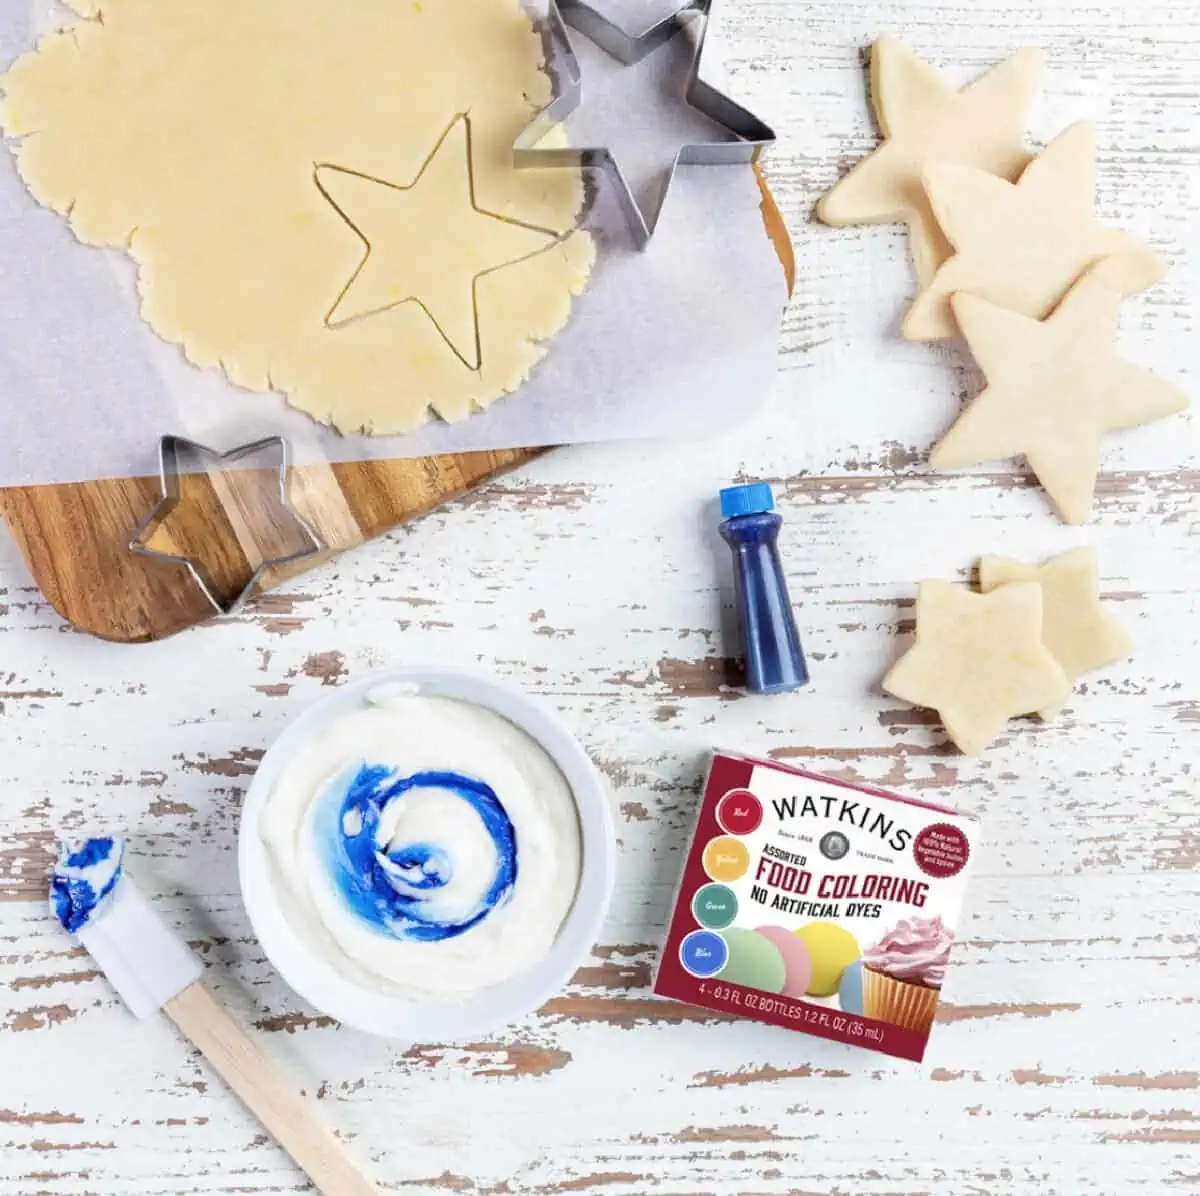 A box of Watkins food coloring on a white wooden background surrounded by uncooked, cut cookies, cookie cutters, and frosting.